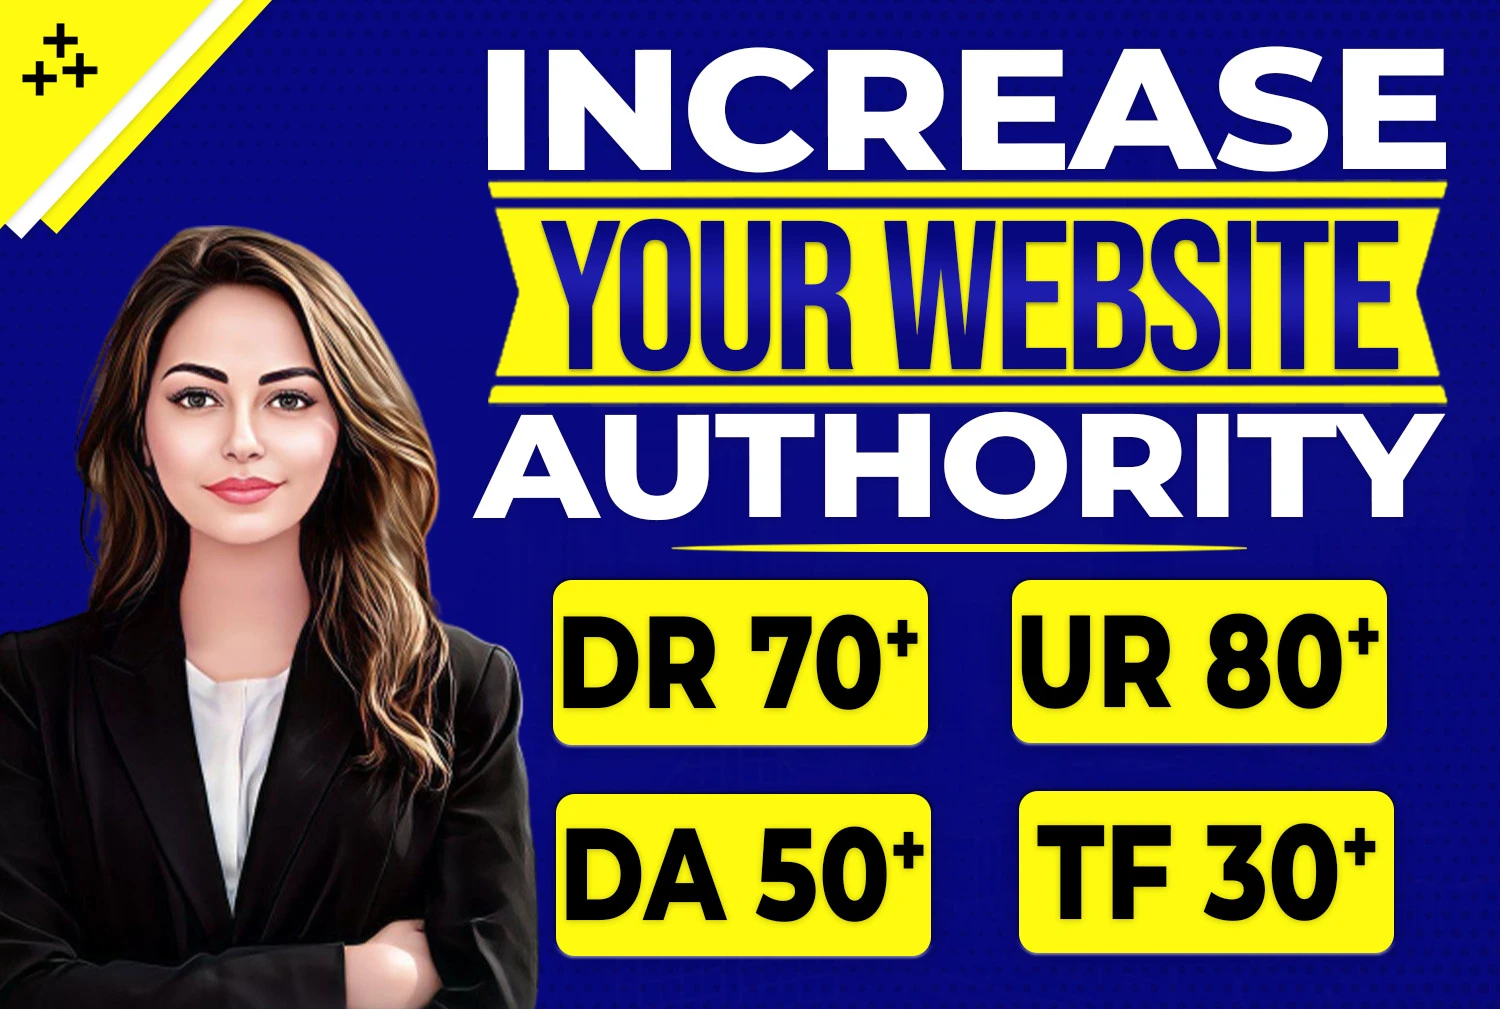  Get All In One Package Increase Domain Rating 70+Trust Flow 30+ DA 50+Ur 80+Guranteed